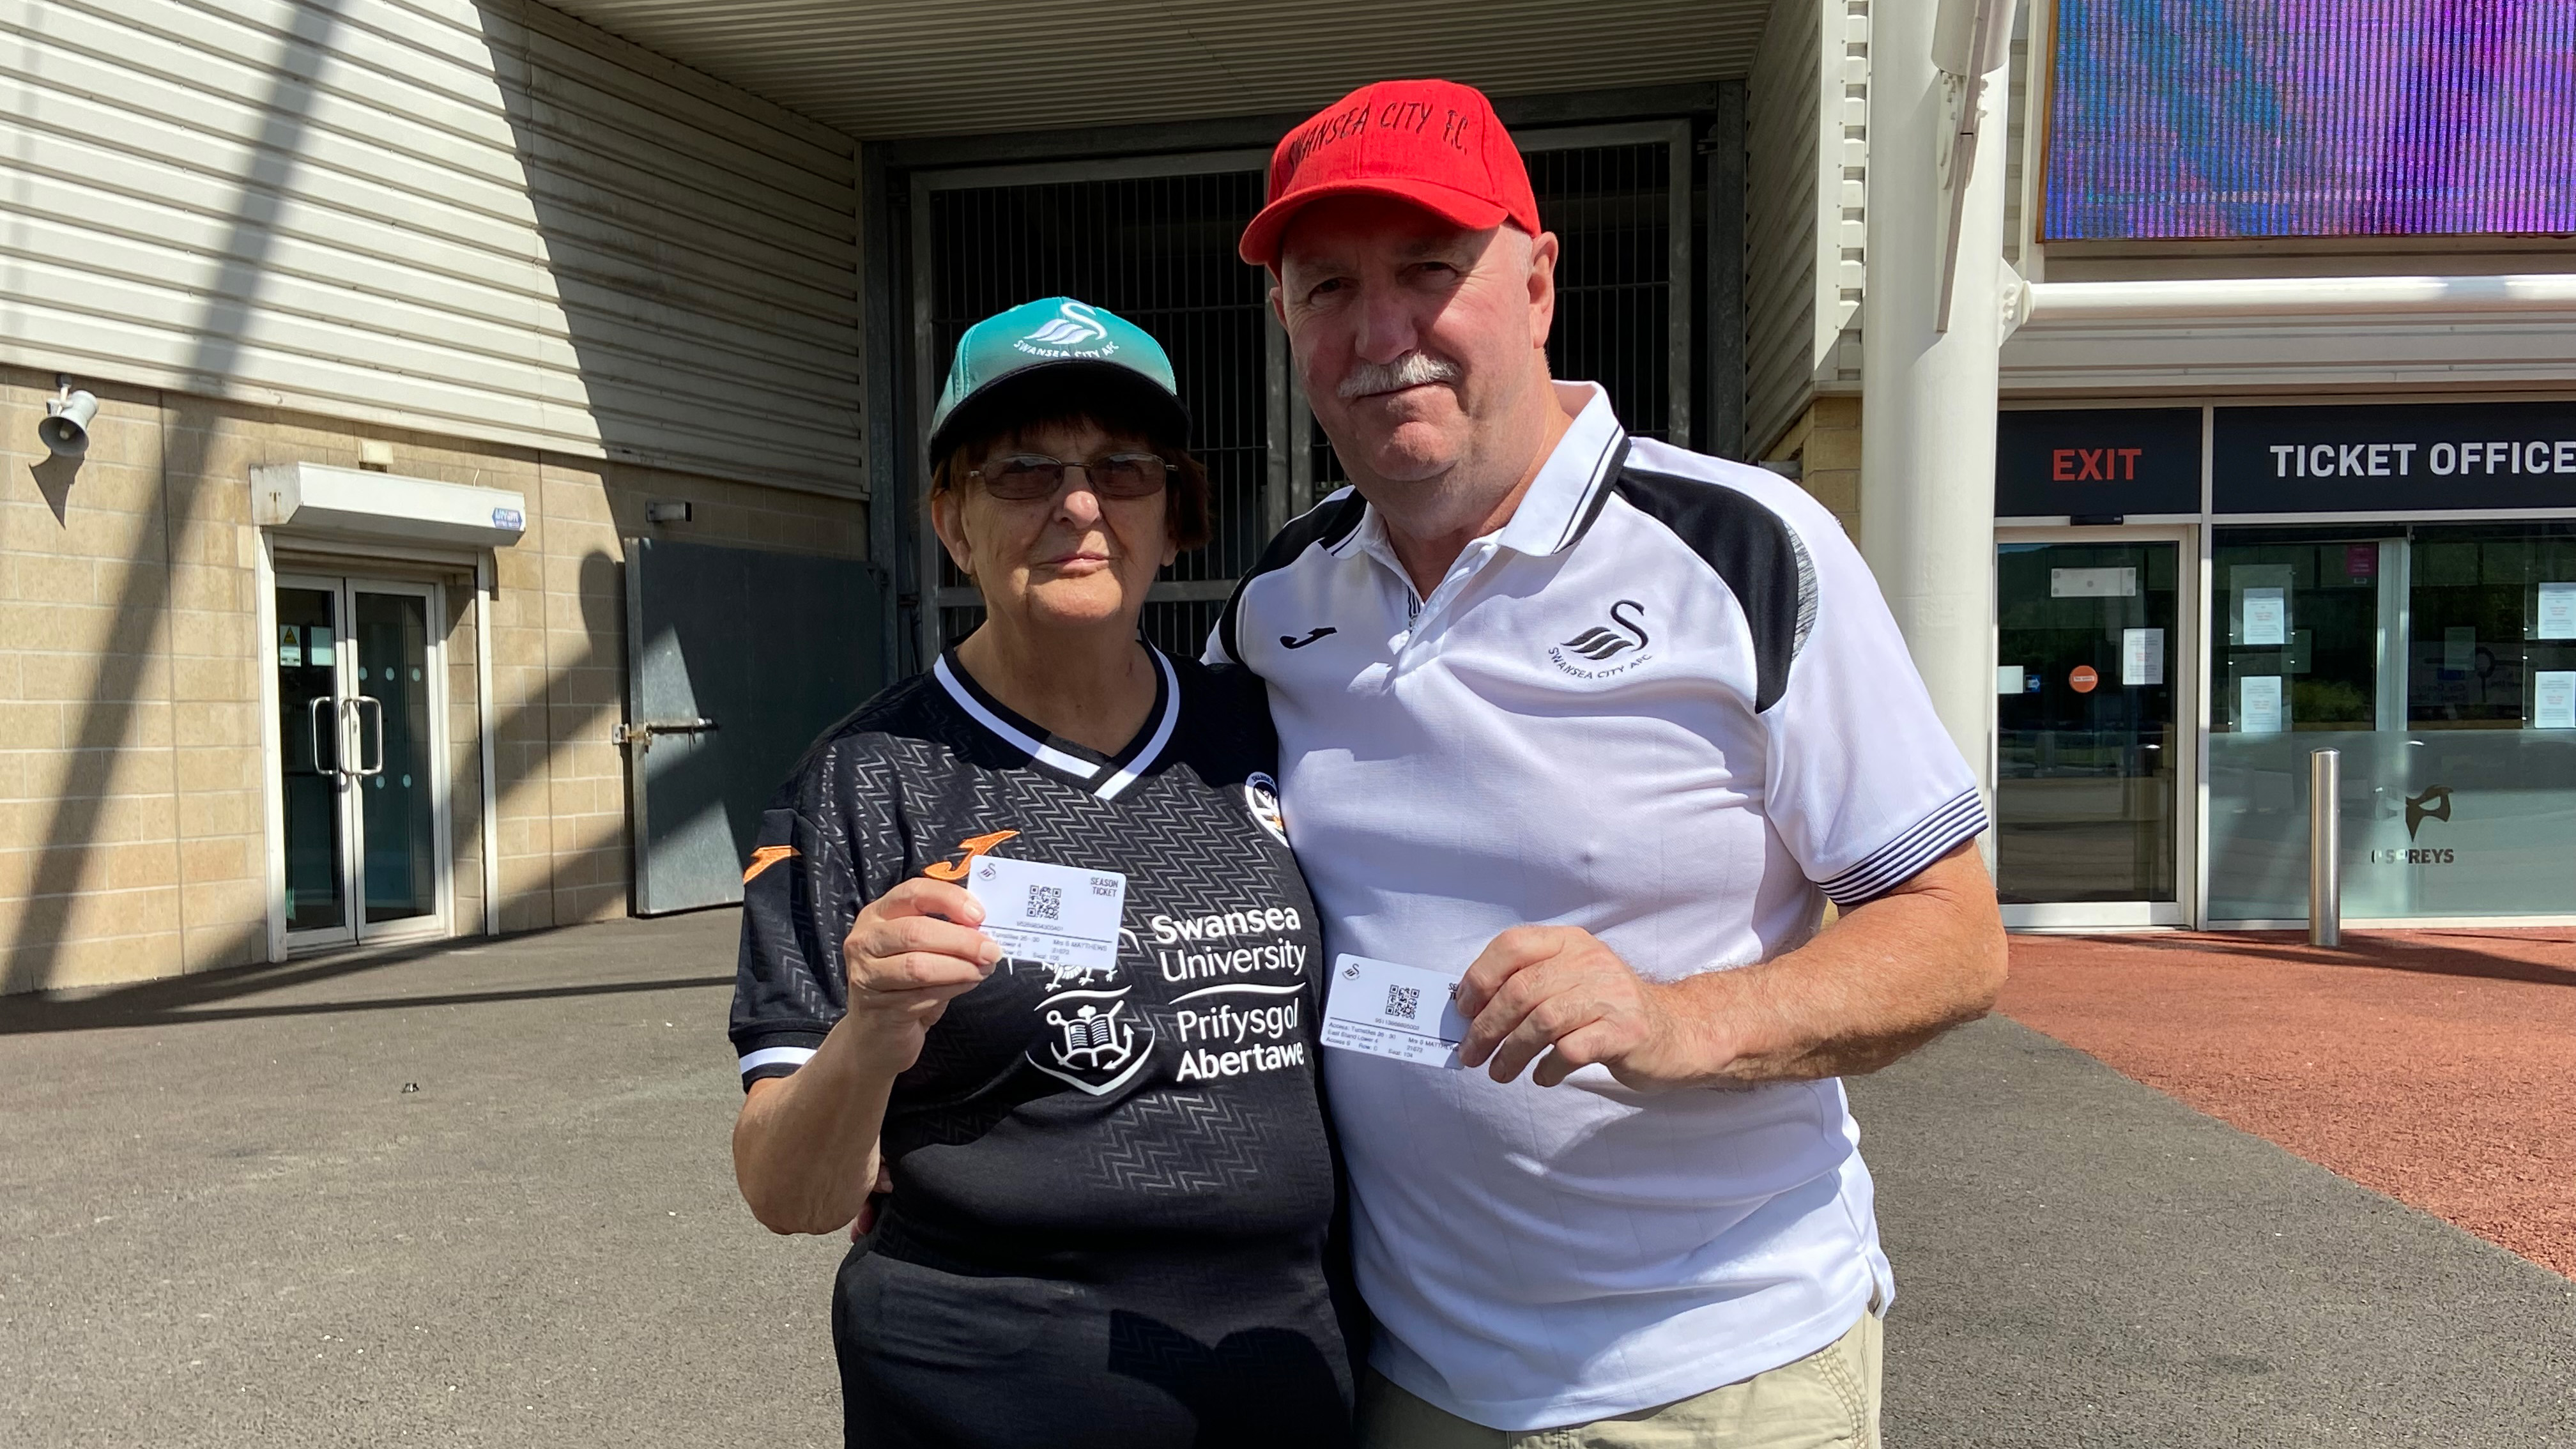 Sue and her husband with their 2022-23 season tickets